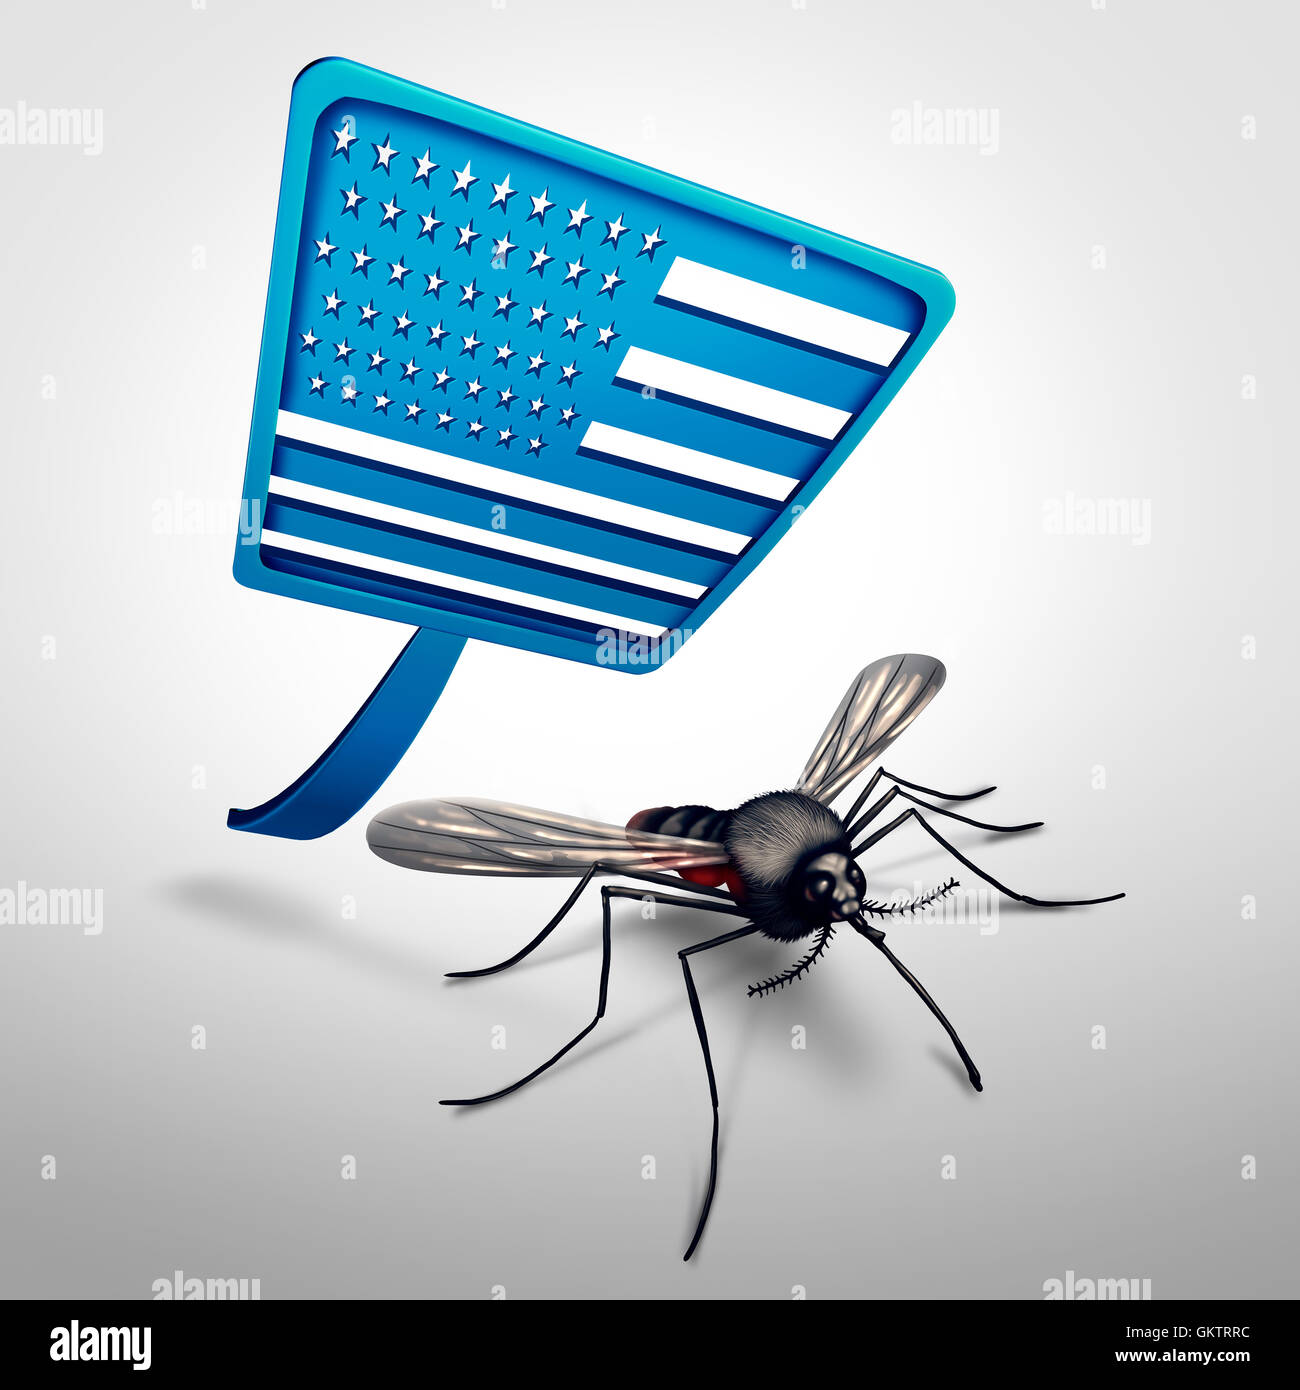 Zika in the United States concept as a mosquito being swatted by a fly swatter as a dangerous virus medical health crisis and public health concern or pest control with 3D illustration elements. Stock Photo